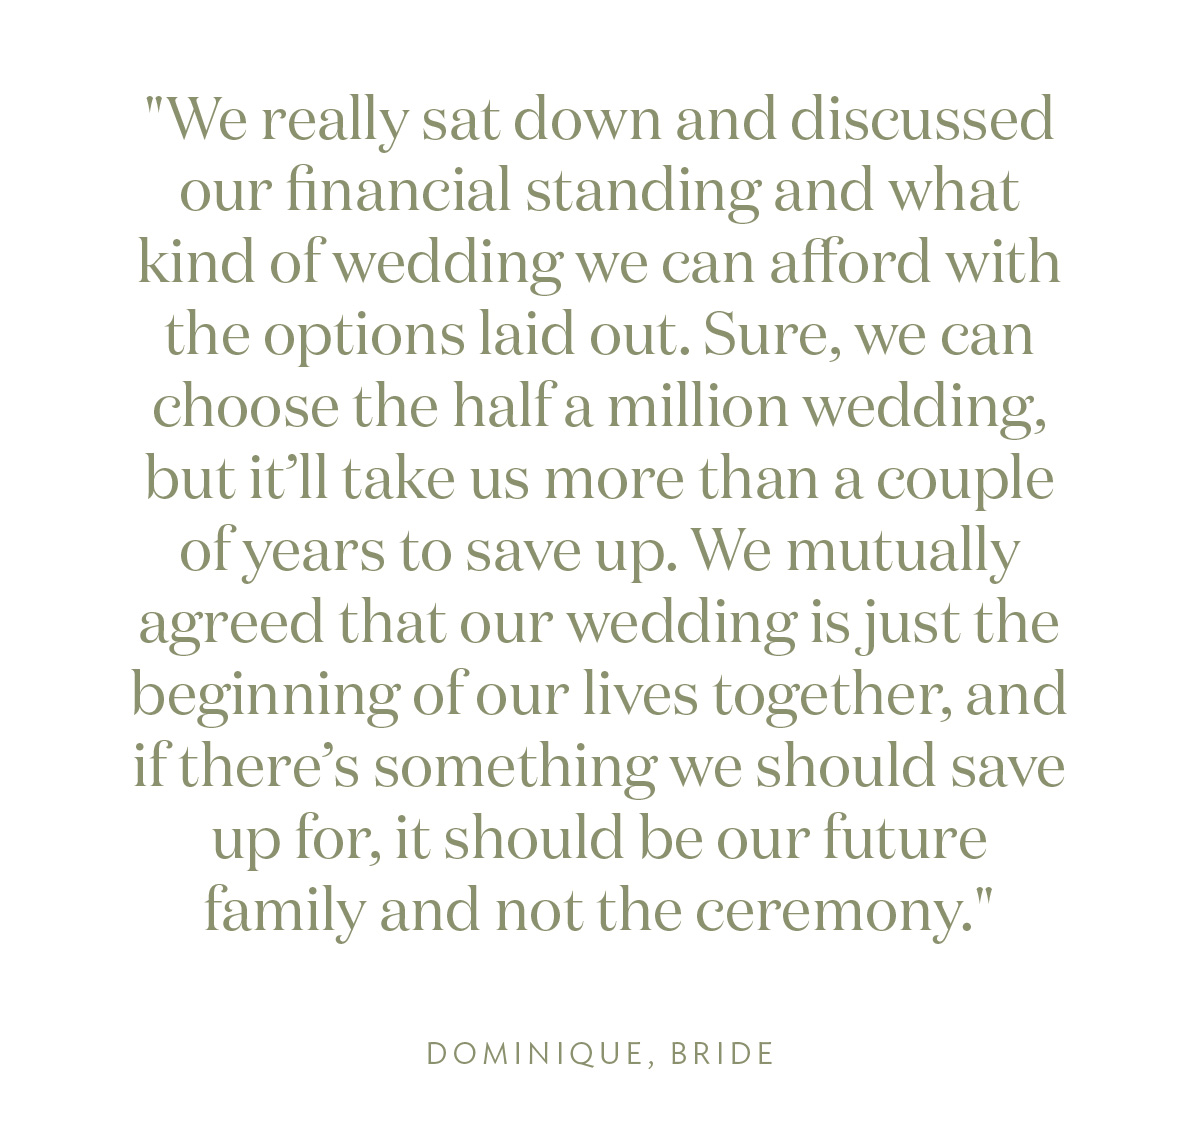 "We really sat down and discussed our financial standing and what kind of wedding we can afford with the options laid out. Sure, we can choose the half a million wedding, but it’ll take us more than a couple of years to save up. We mutually agreed that our wedding is just the beginning of our lives together, and if there’s something we should save up for, it should be our future family and not the ceremony." Dominique, Bride